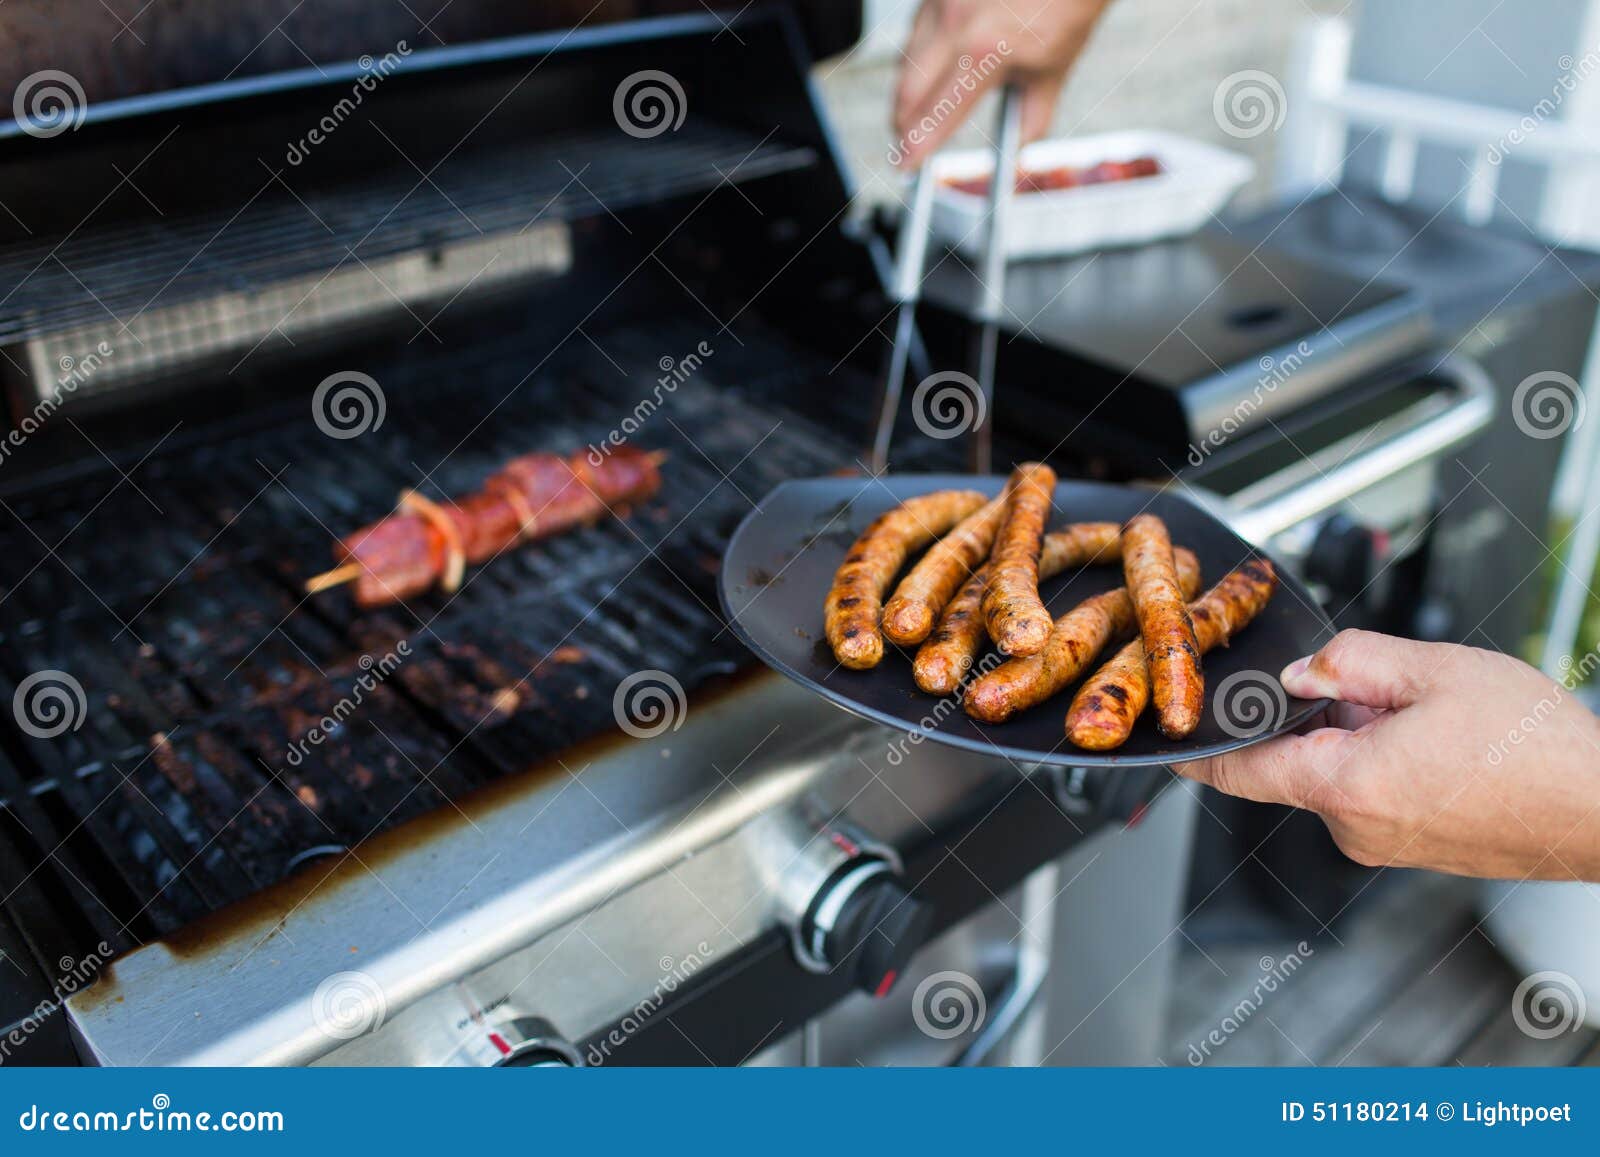 bbq with sausages and red meat on the grill